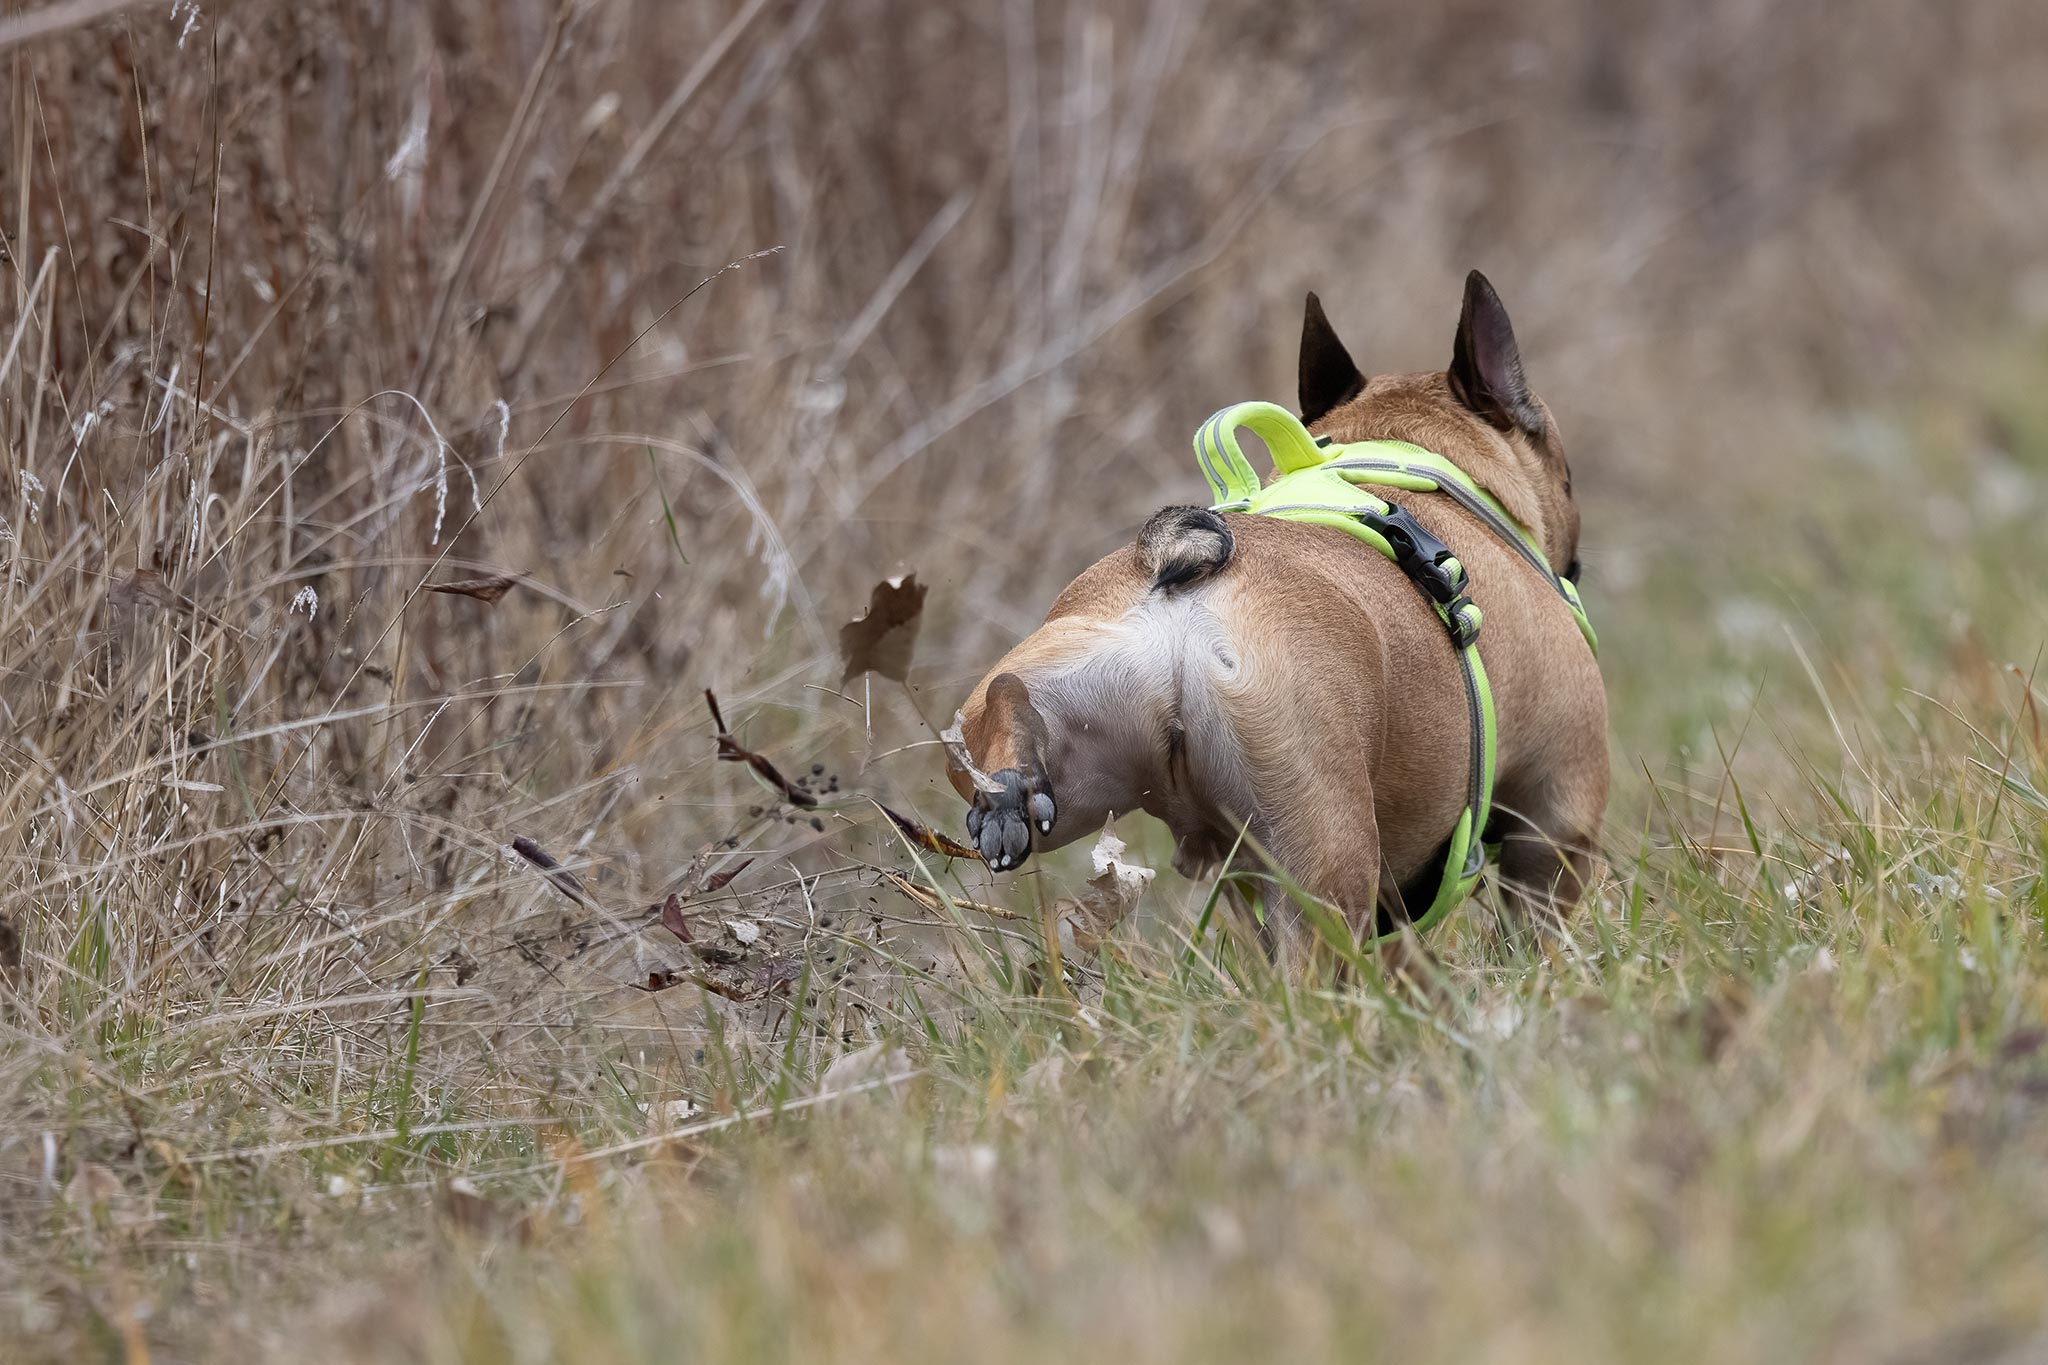 dogs kick after they poop in boca raton, florida